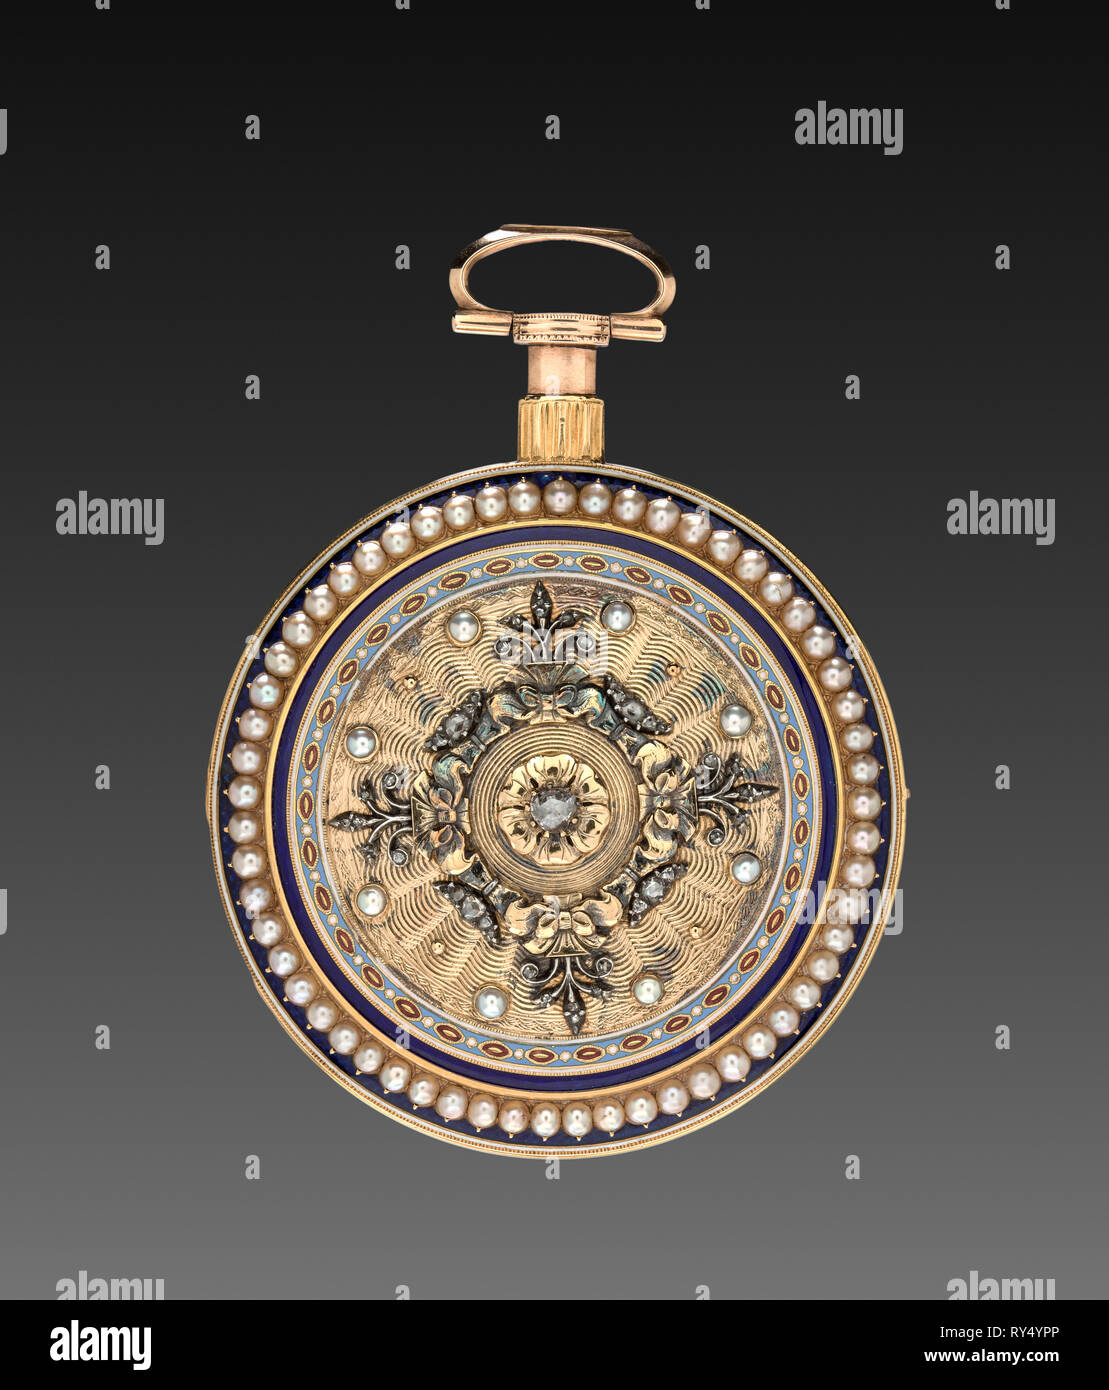 Watch, 1813. John Ray (British), James Montague (British), Just and Son (British). Gold, silver, pearls, diamonds, and enamel; diameter: 8.6 x 6.1 cm (3 3/8 x 2 3/8 in Stock Photo